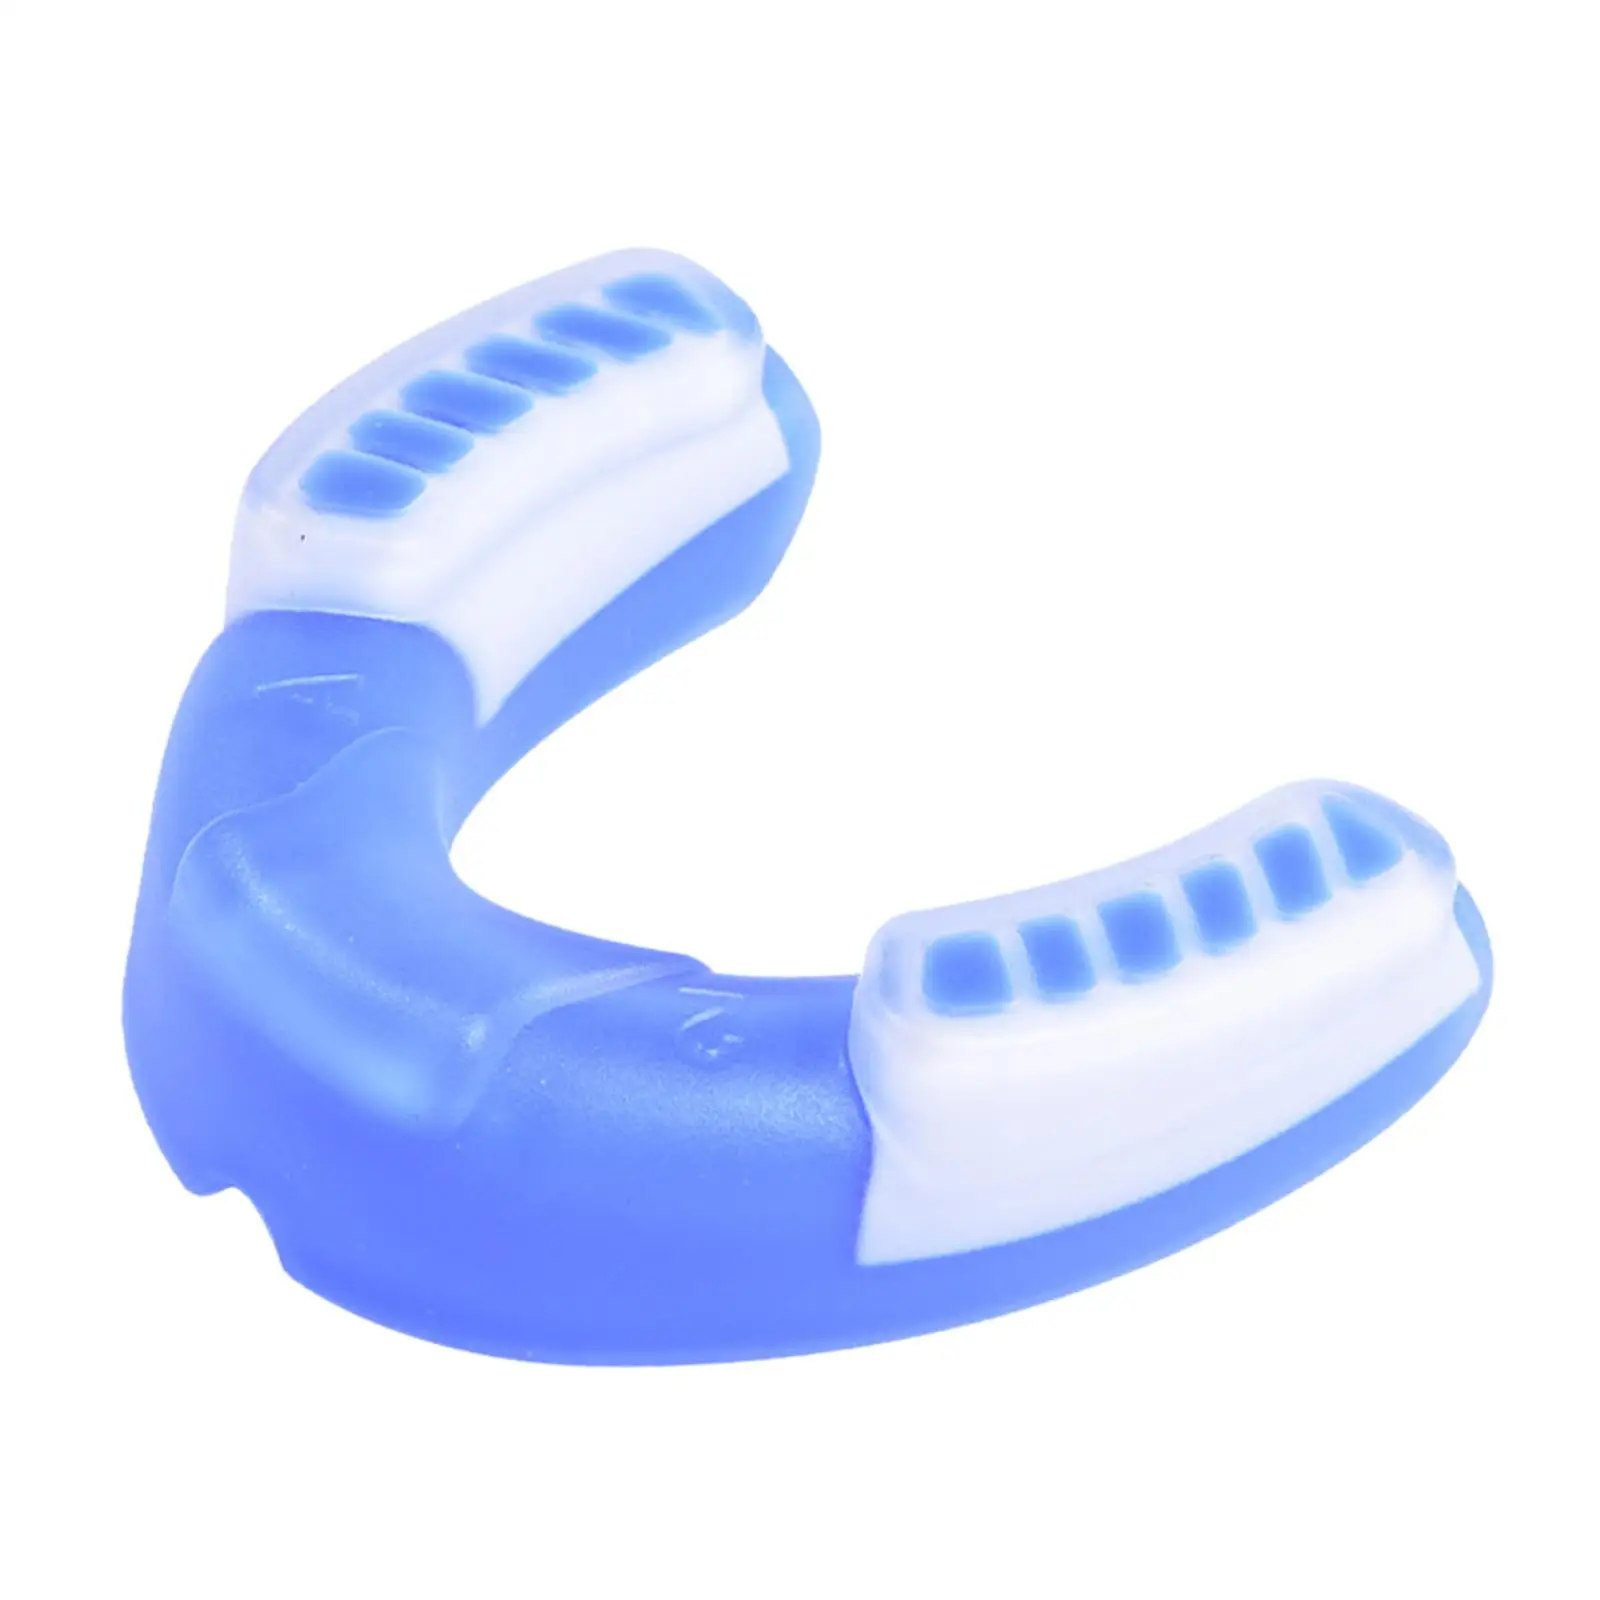 Mouth Guard Sparring Professional Mouthguard Men Women Soft Mouth Protector for Softball Kickboxing Boxing Football Taekwondo